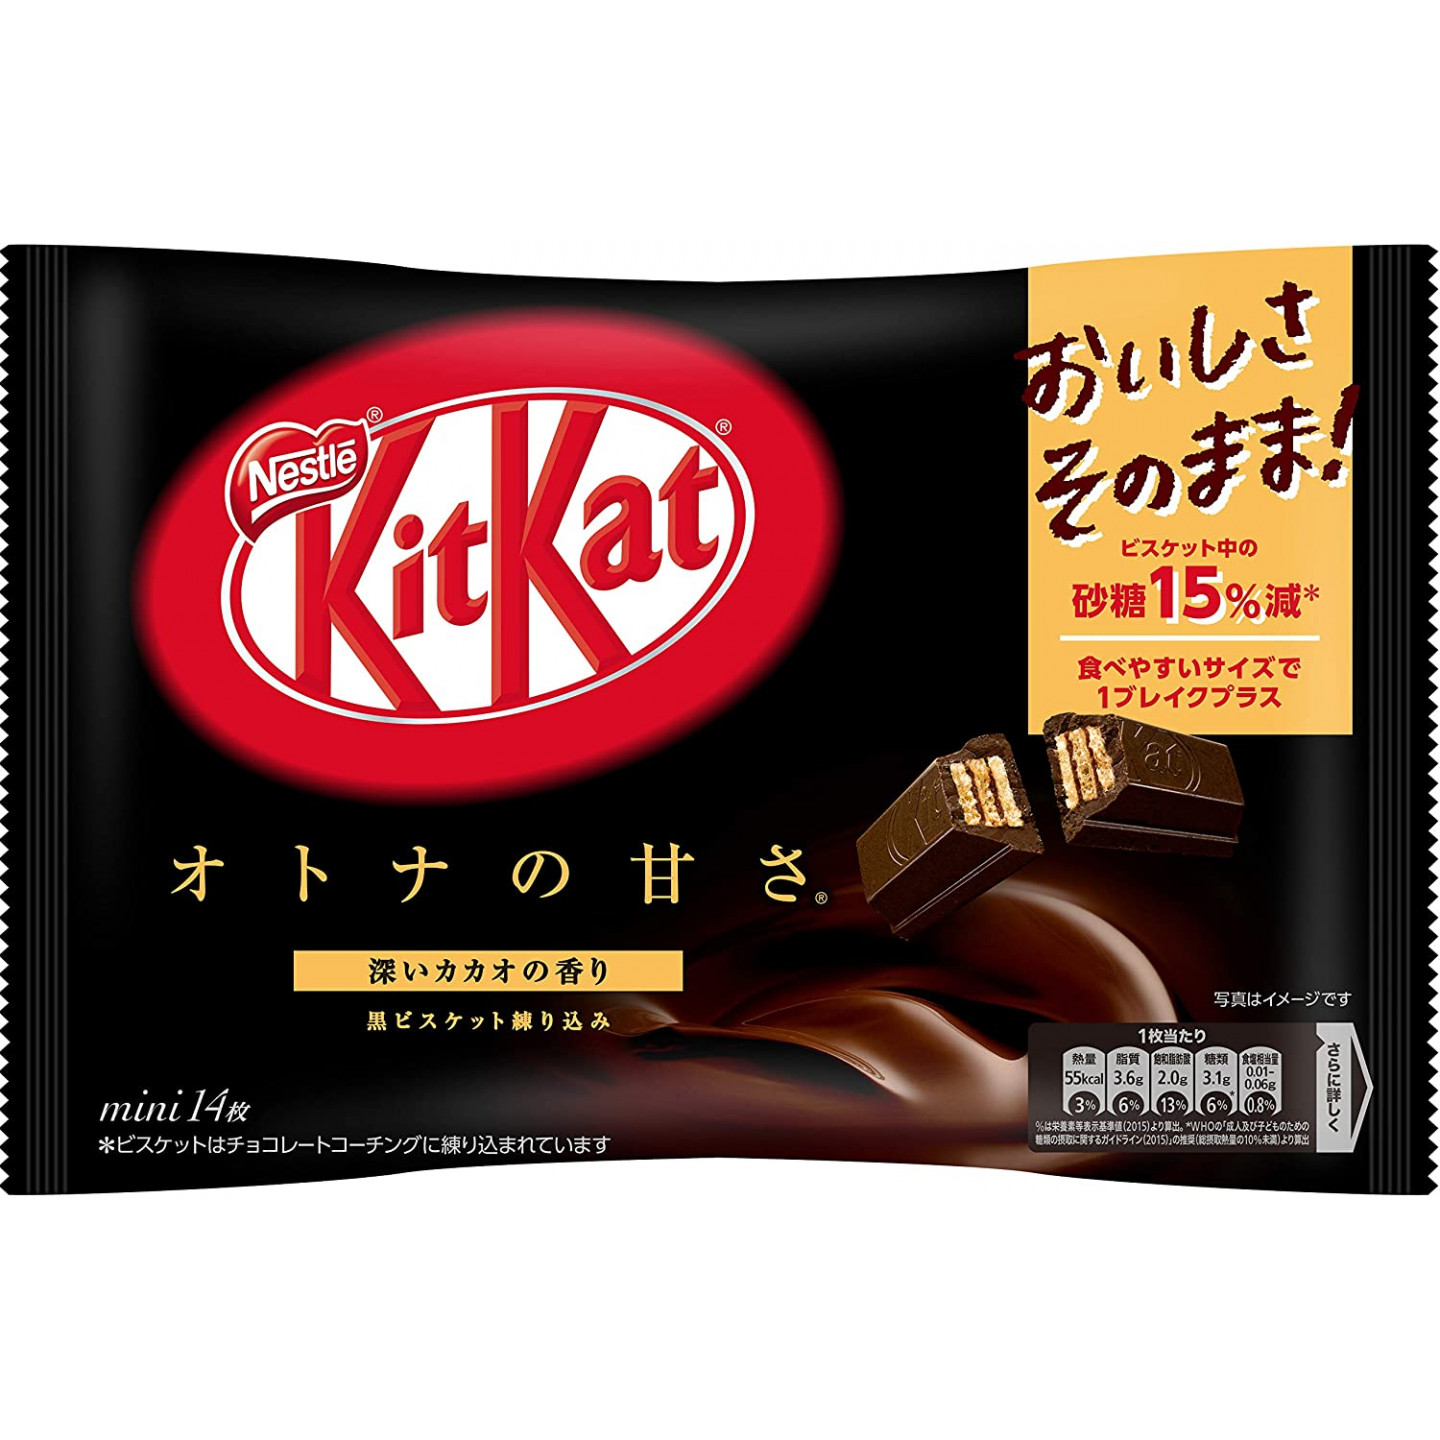 Kitkat Mini Photos, Images and Pictures